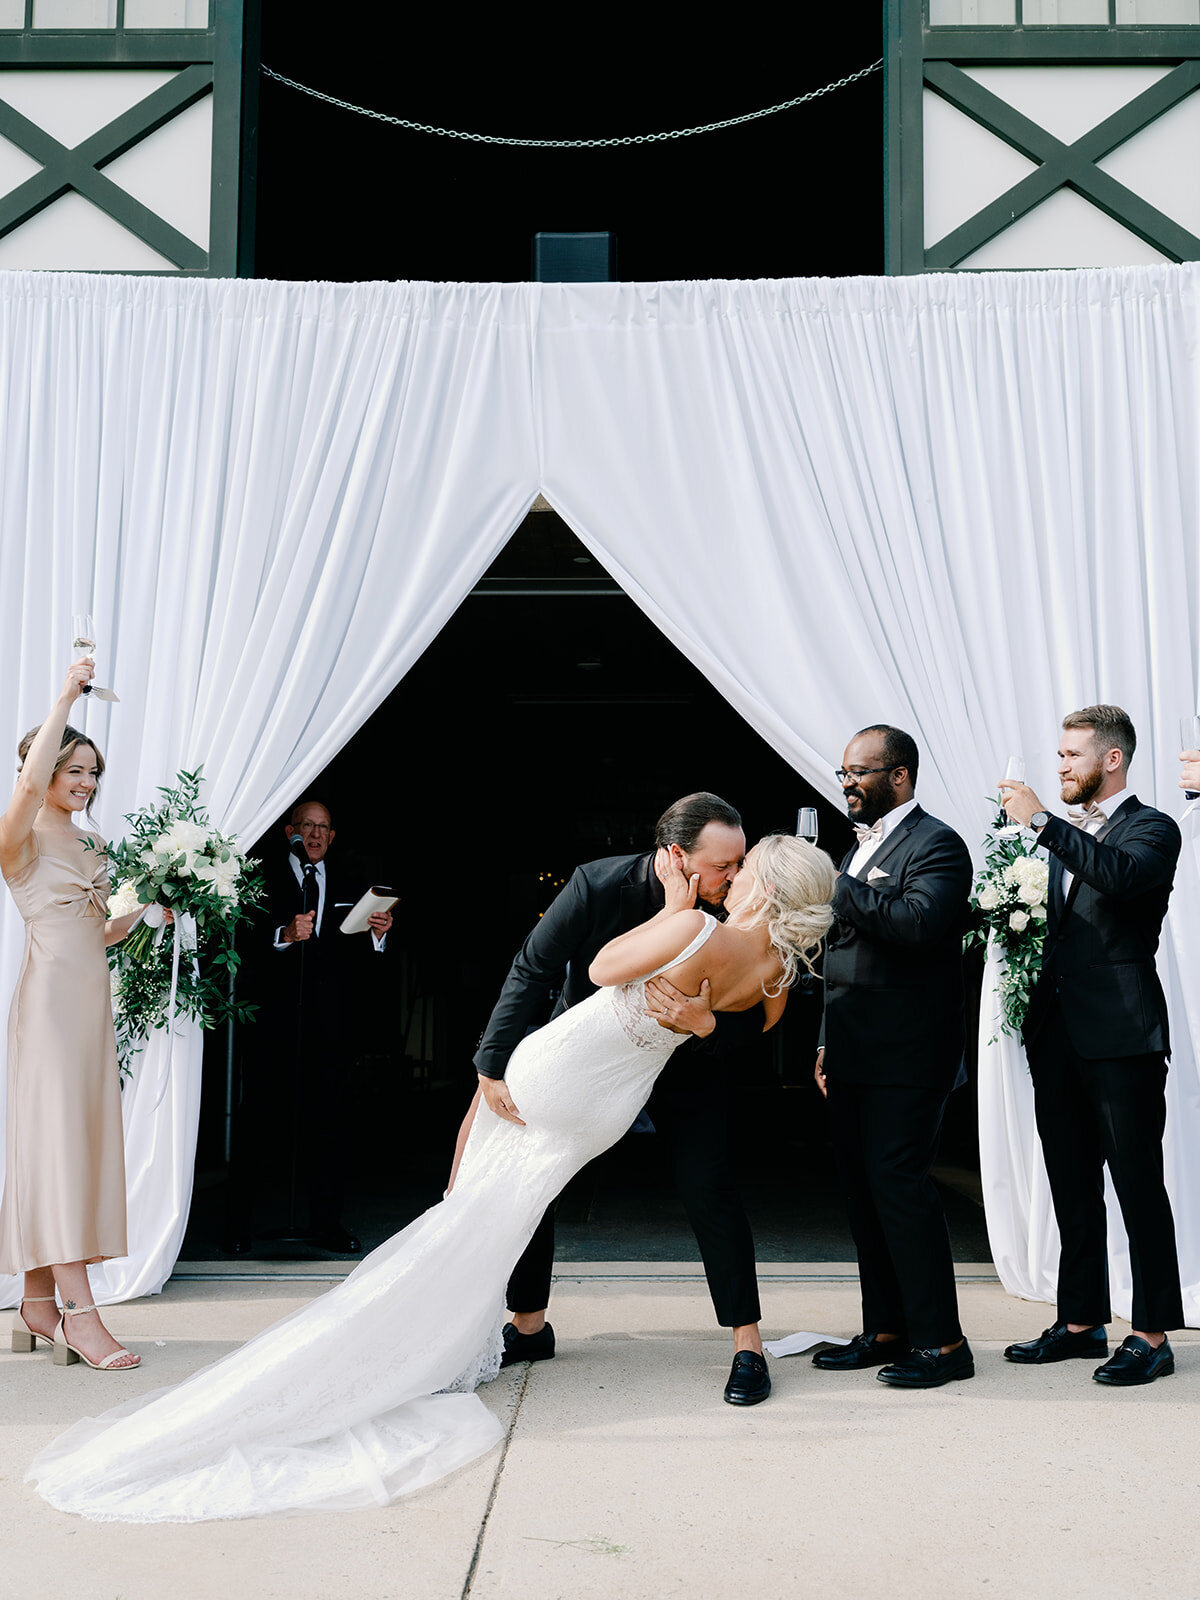 Bride and groom share their first kiss as he dips her and bridal party claps in the background